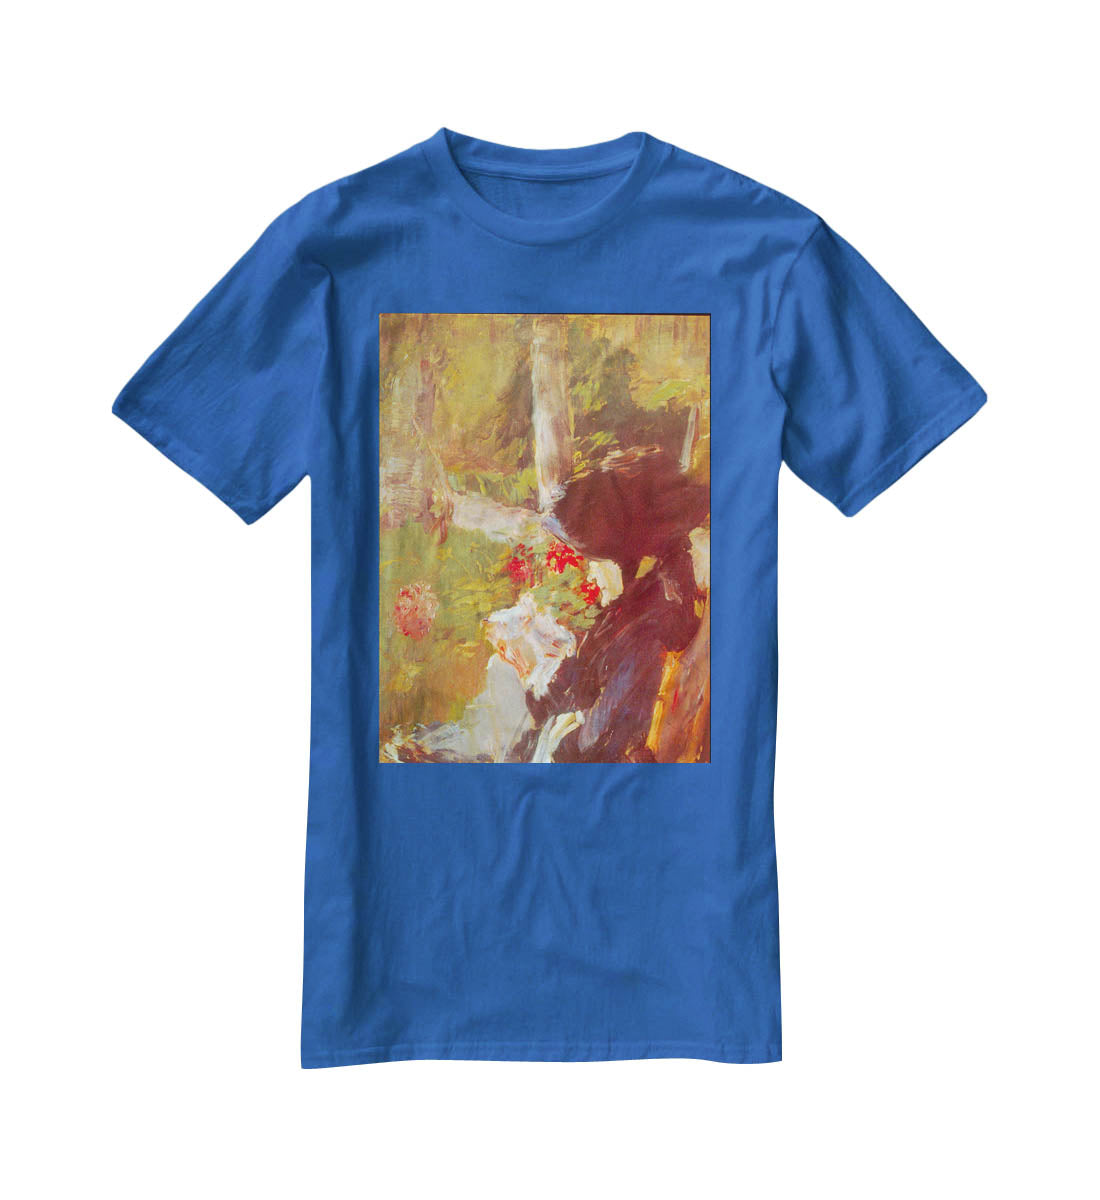 Manets Mother by Manet T-Shirt - Canvas Art Rocks - 2